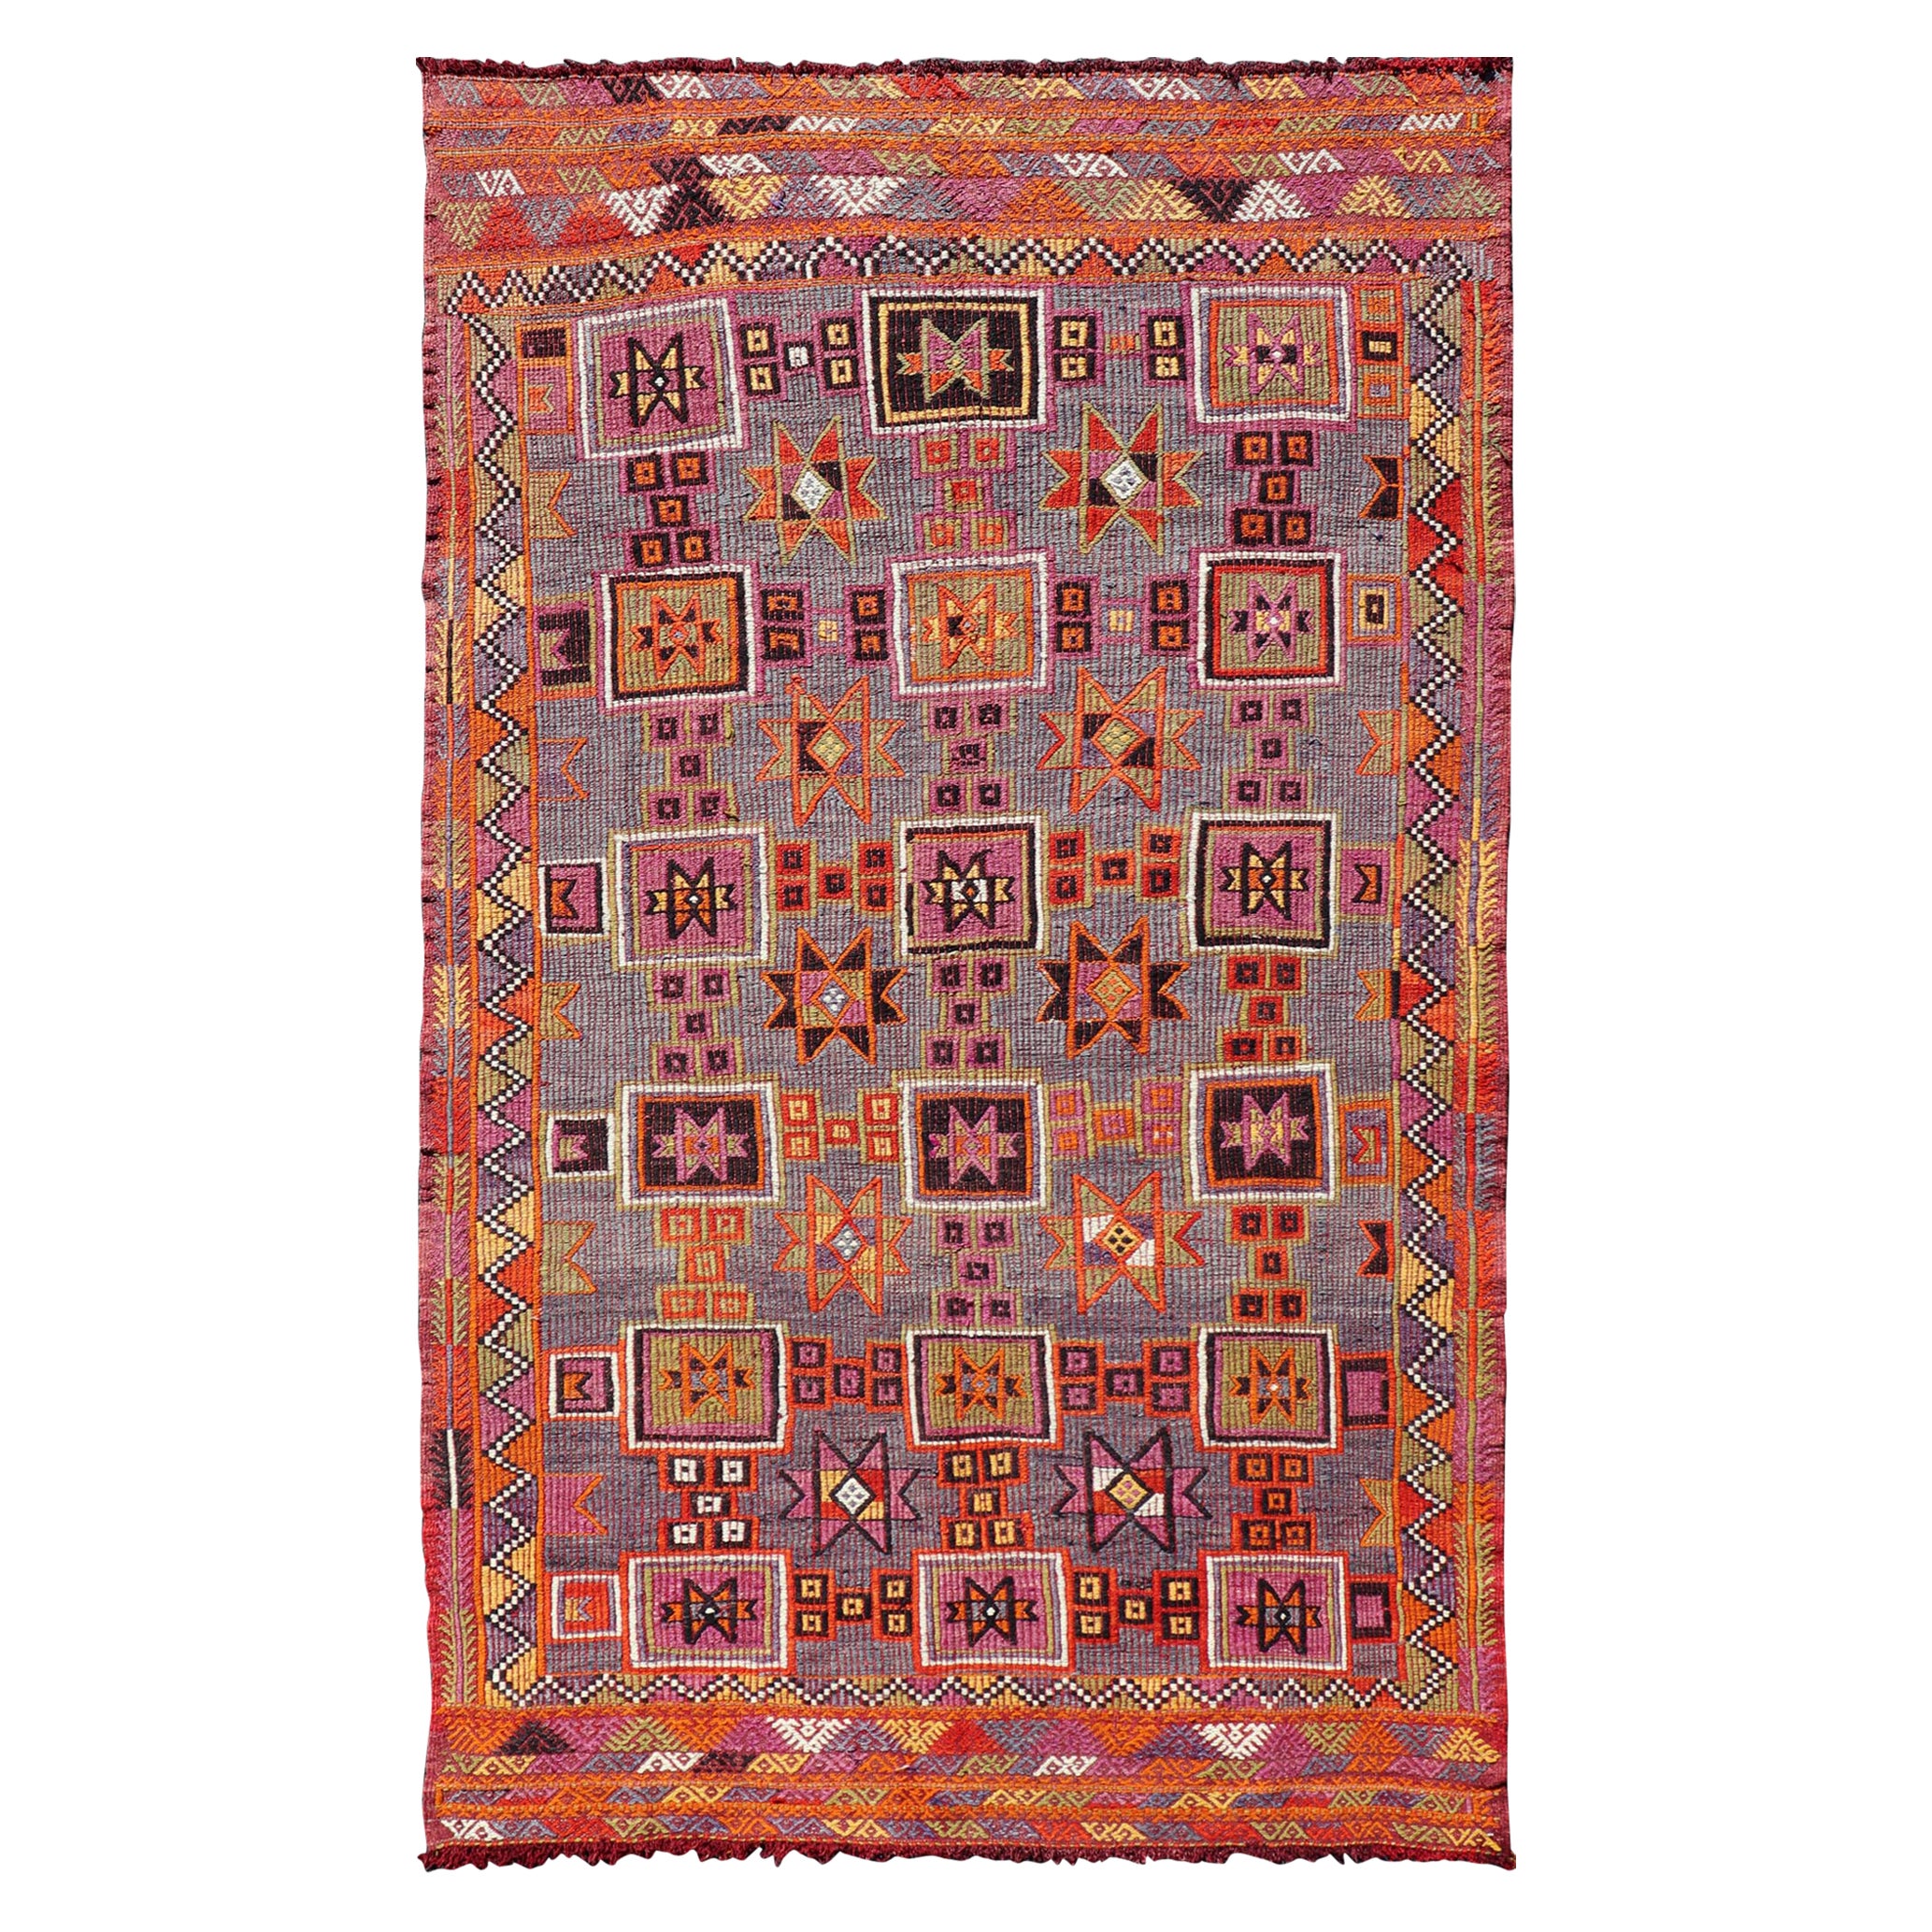 Colorful Vintage Kilim Embroidered Jajeem with Square and Star Design In Purple